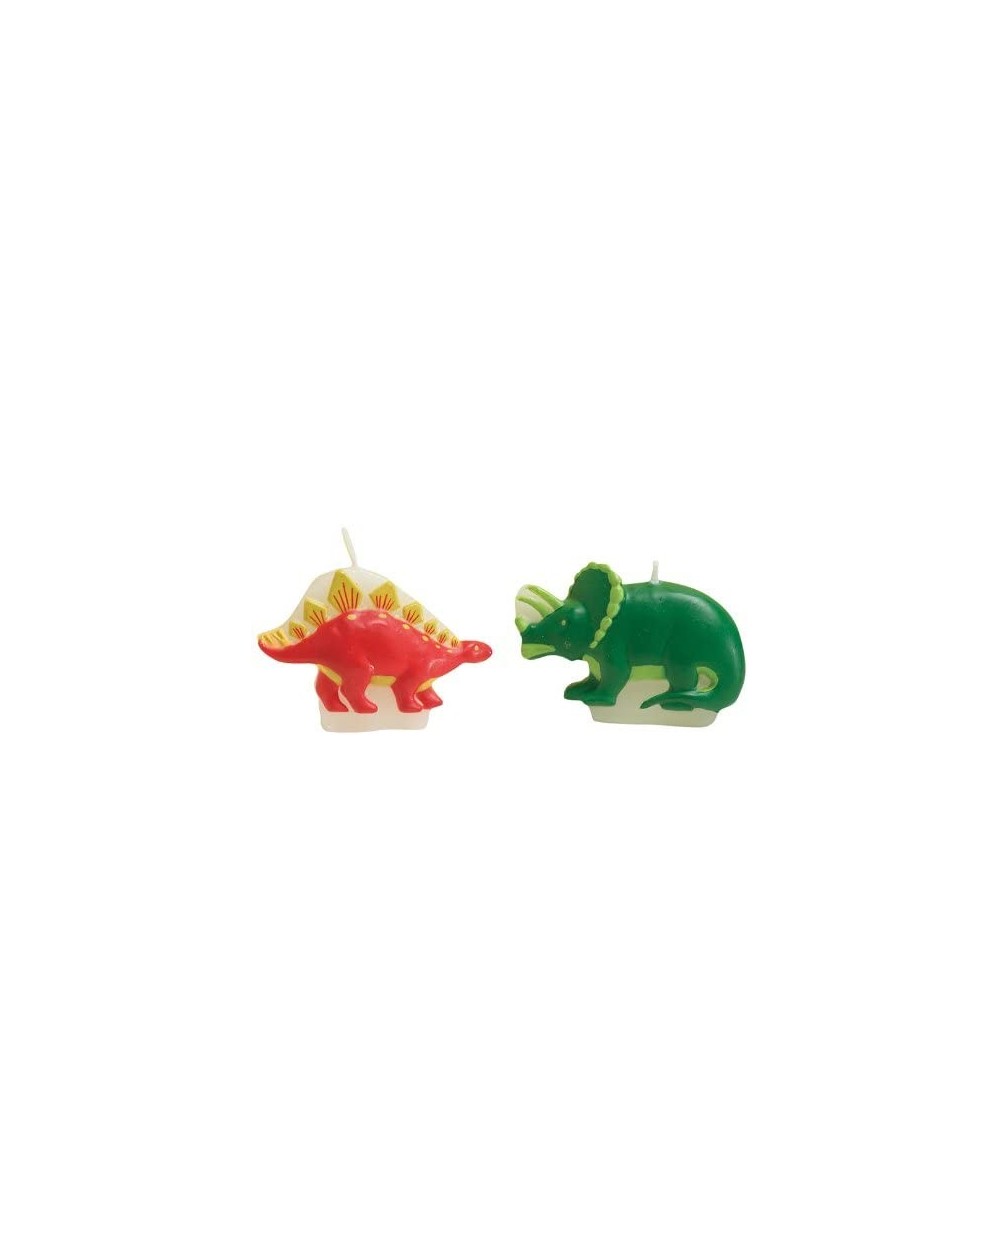 Cake Decorating Supplies Diggin' for Dinos 4 Count Molded Candles - CN11CUAGPVR $7.66